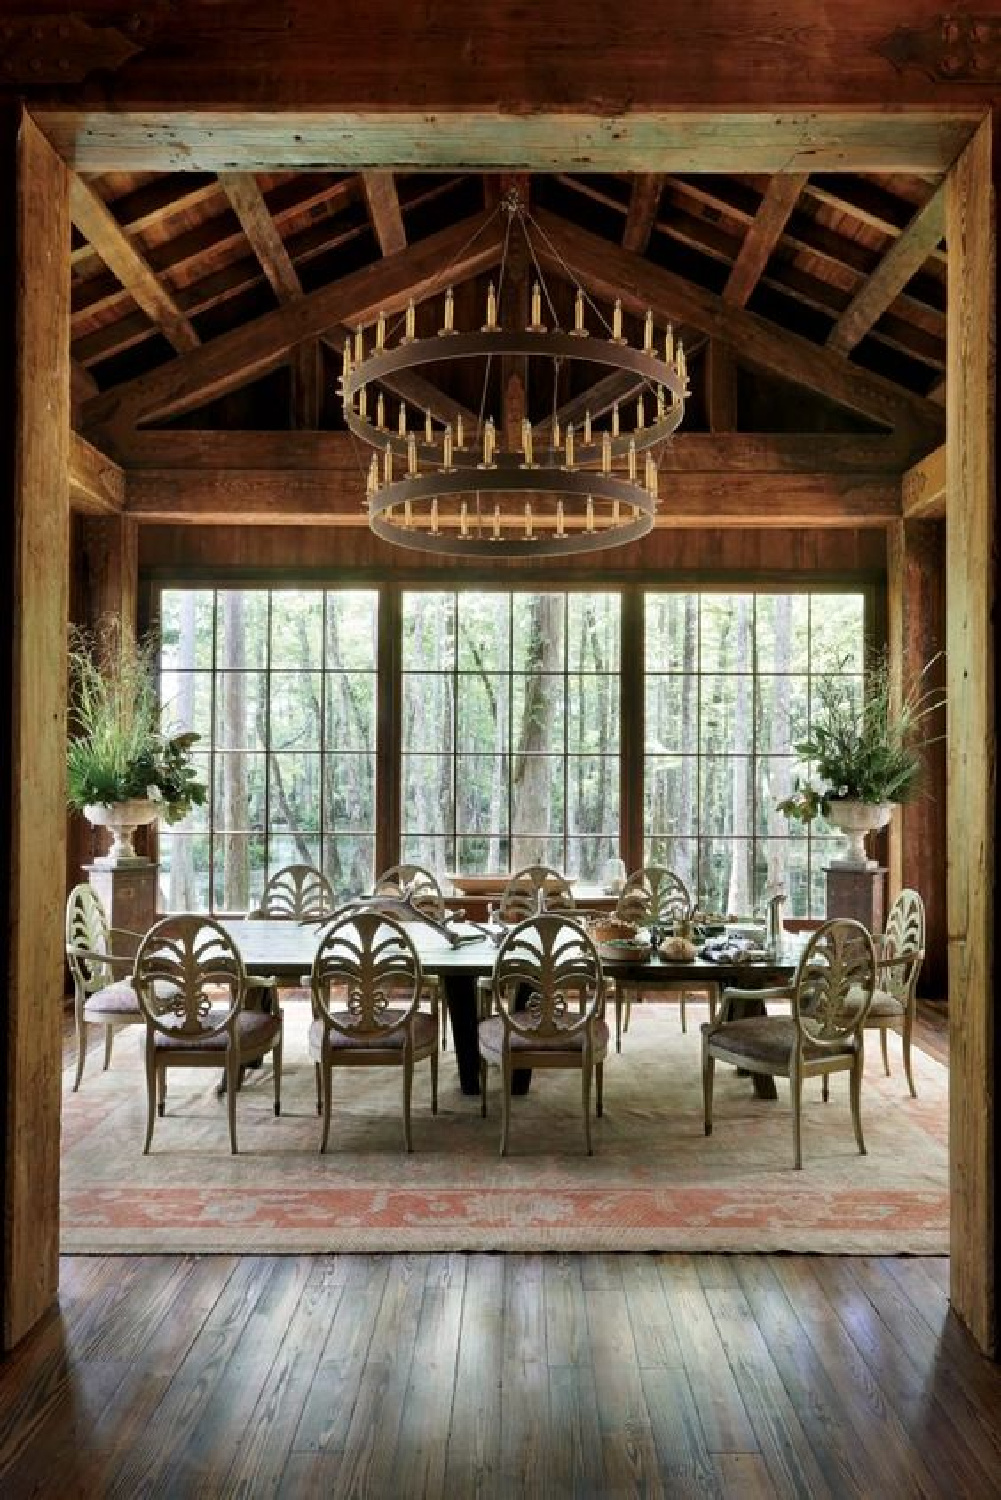 Garden and Gun - rustic party barn with luxurious design, warm woods, and stunning architecture.